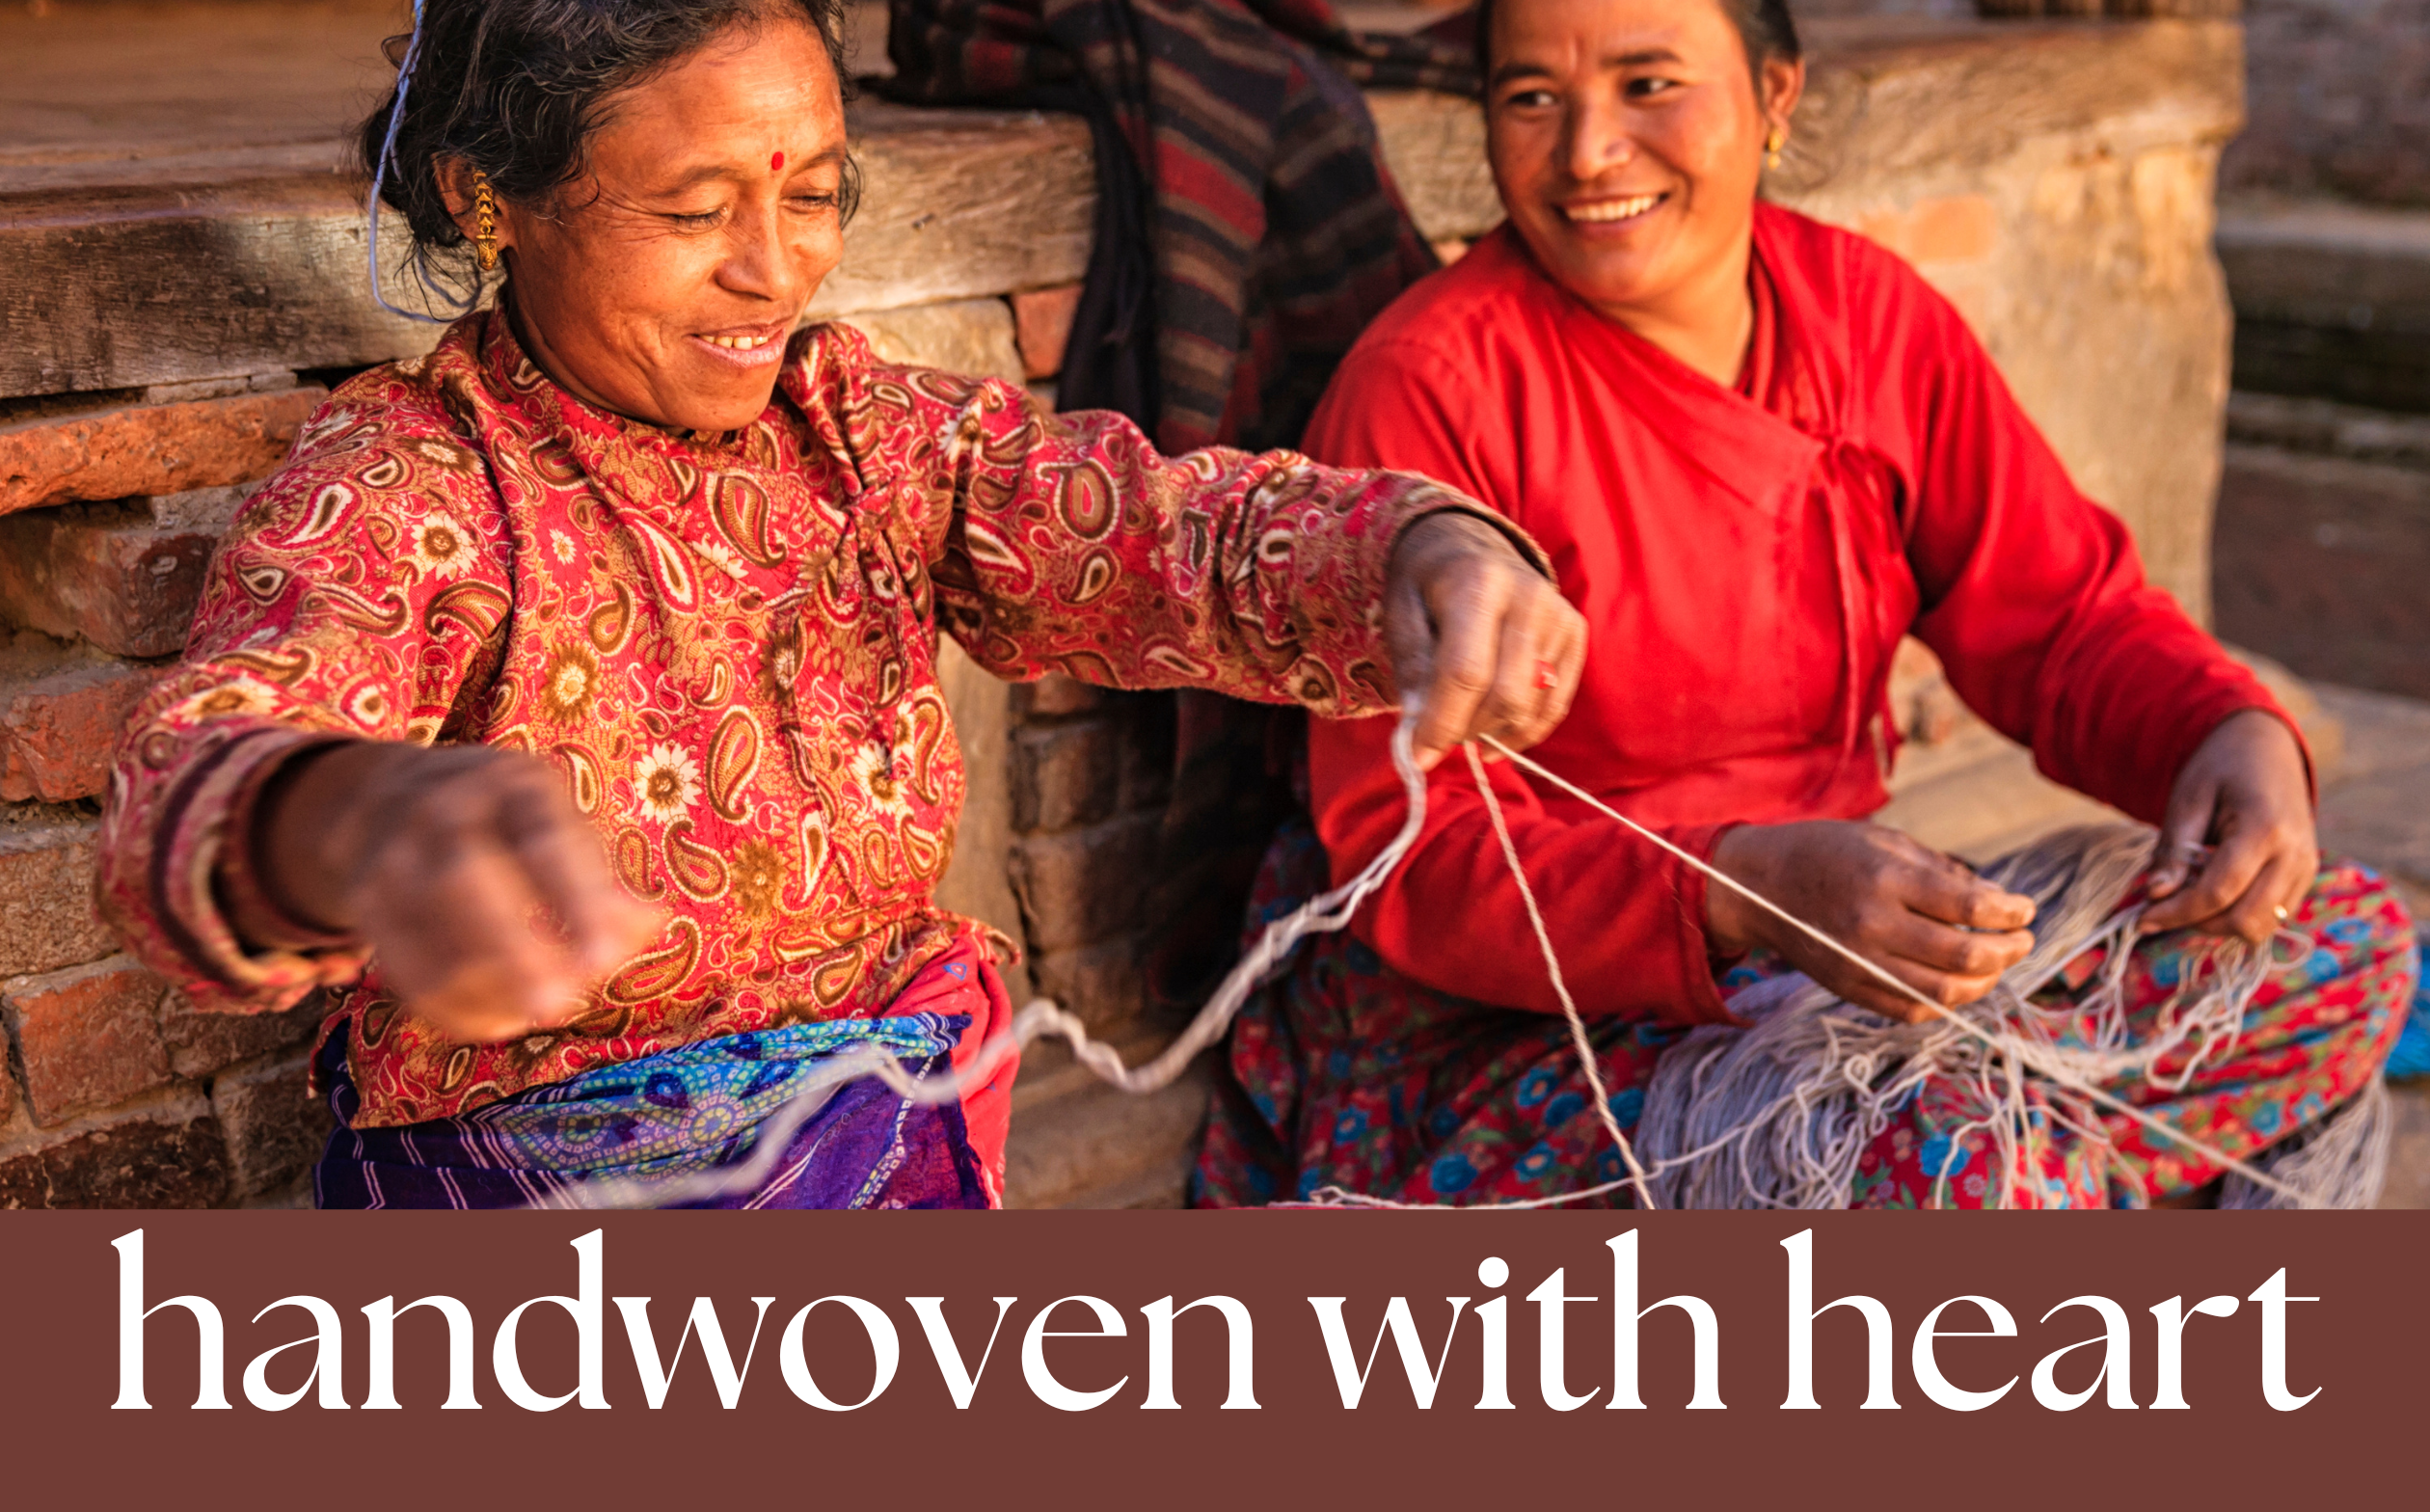 Women weaving hemp fibers by hand with dedication and care.